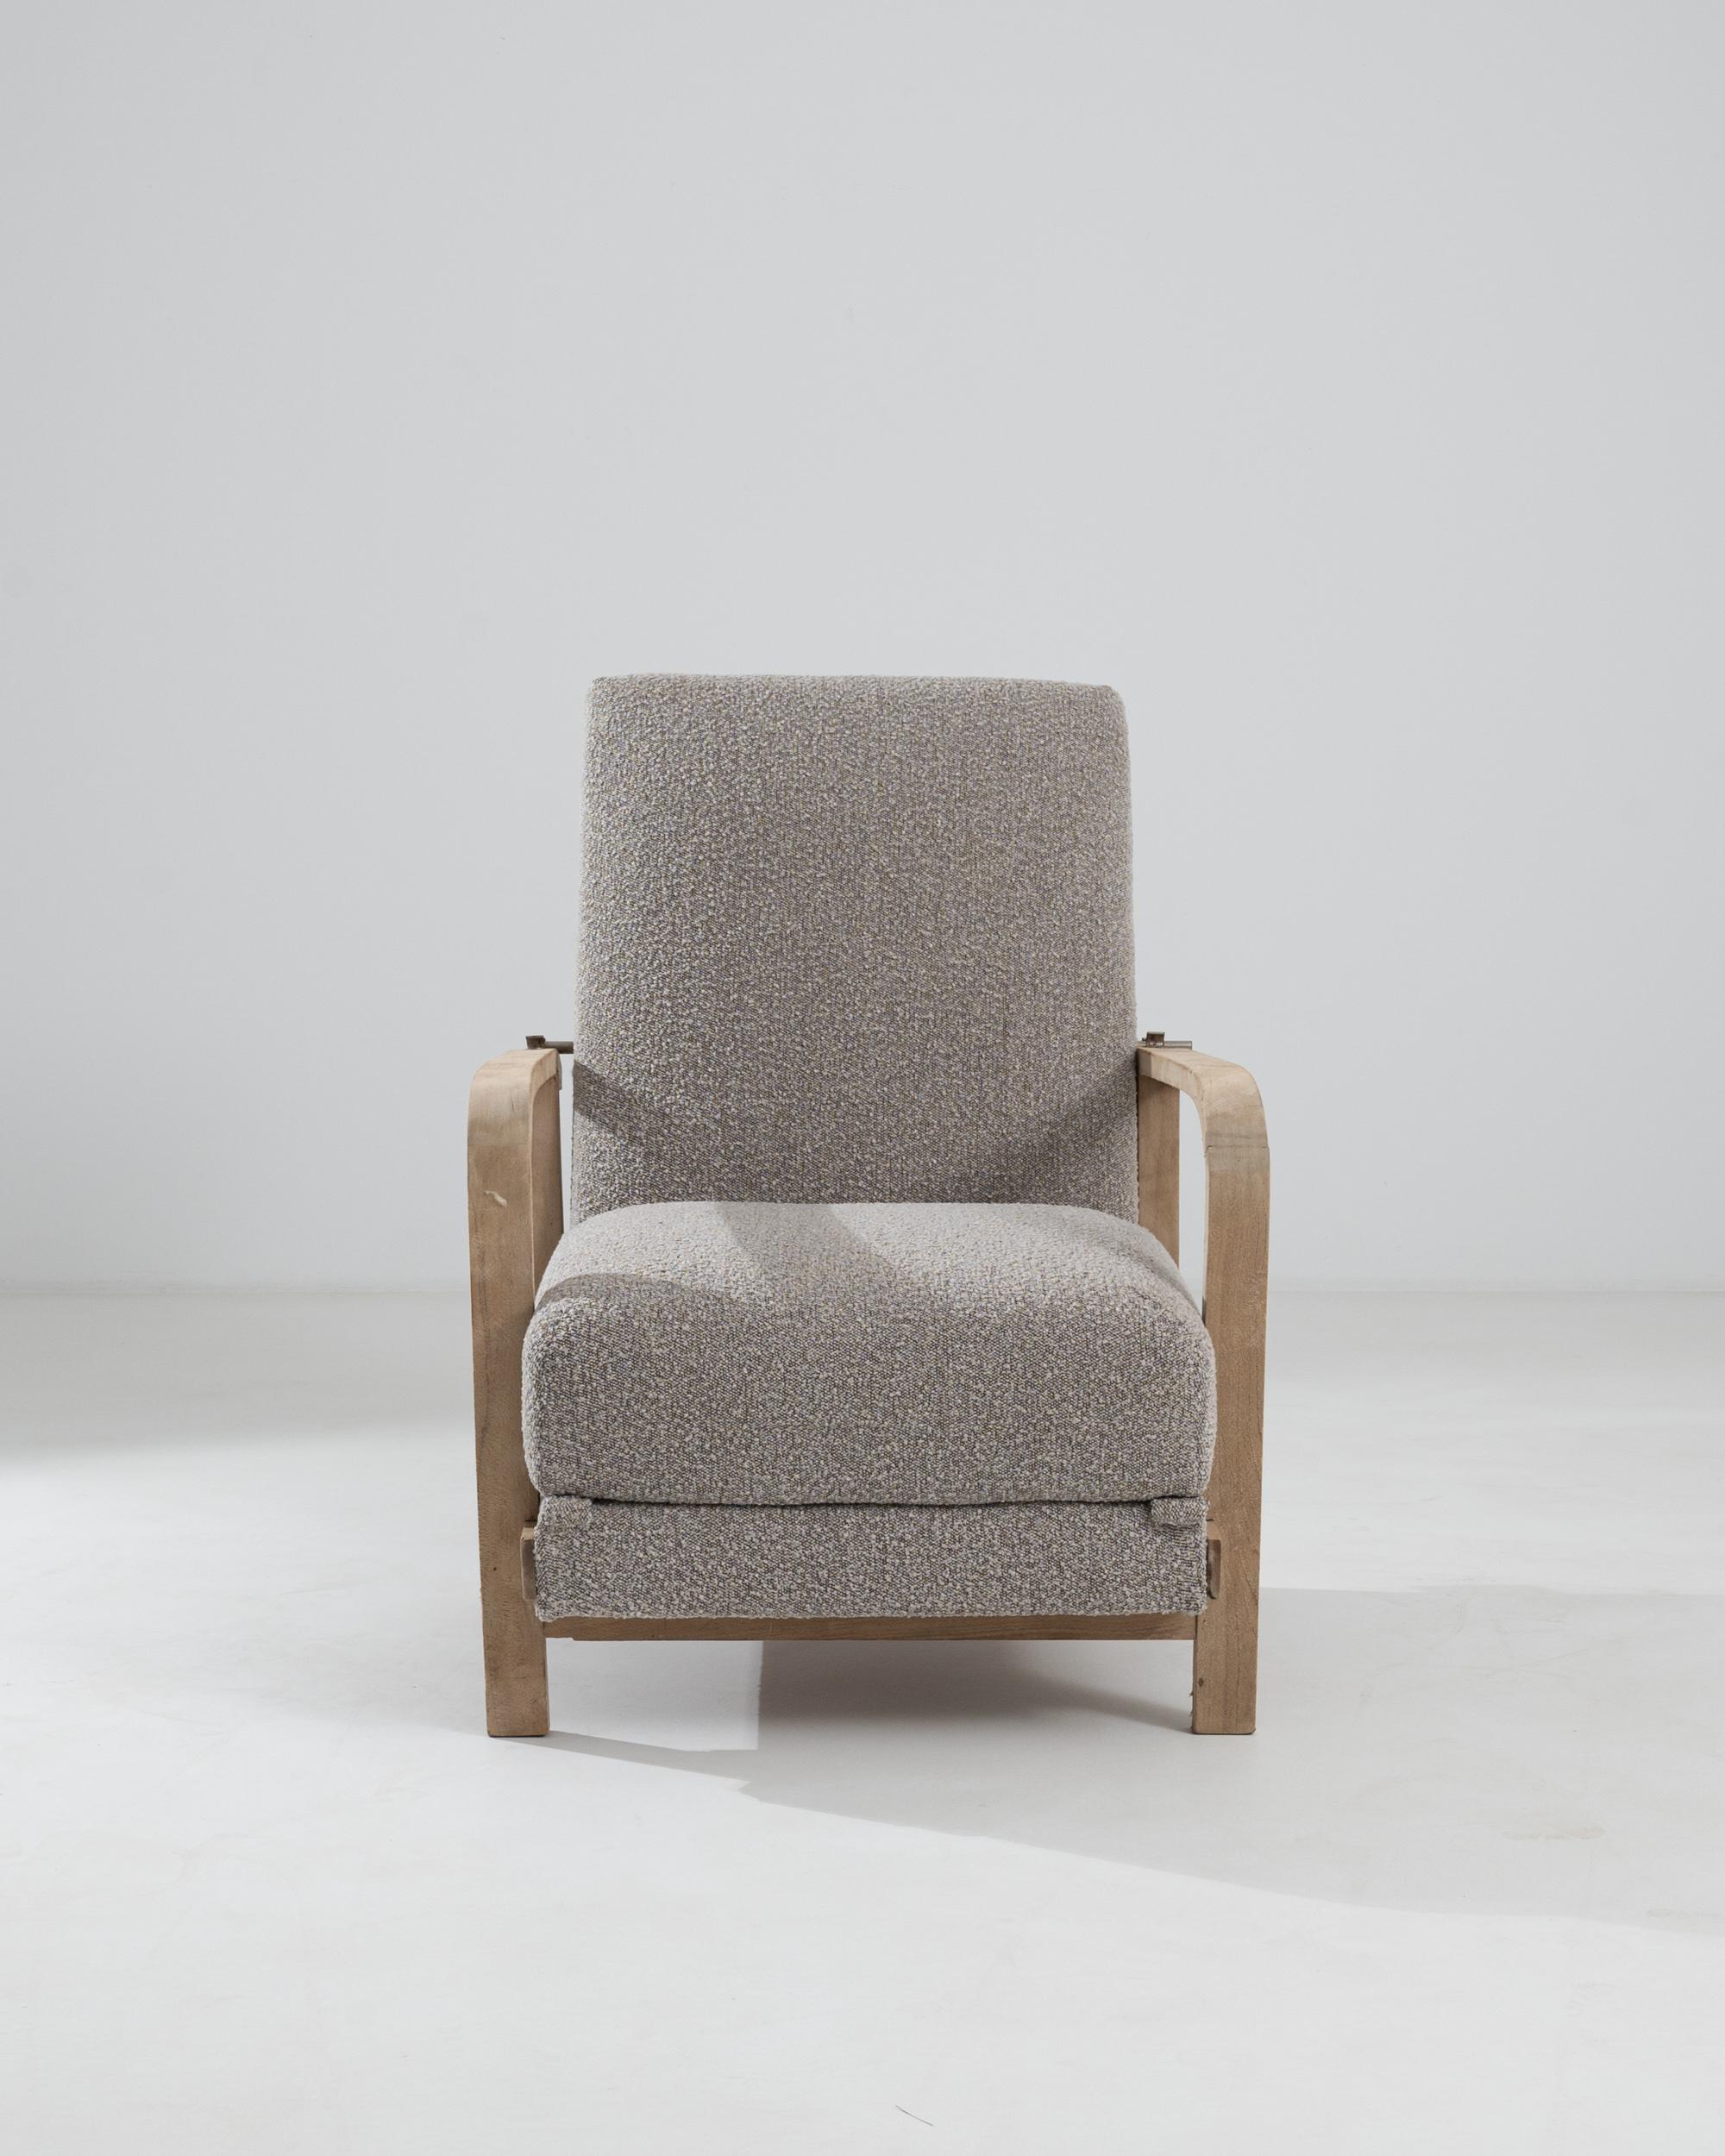 Serene and composed, this vintage armchair offers an irresistibly comfortable seat. Made in Germay in the 1930s, the design takes a Modernist approach, combining a clean shape with soft curves for an organic feel. The pale ash-blonde wood of the